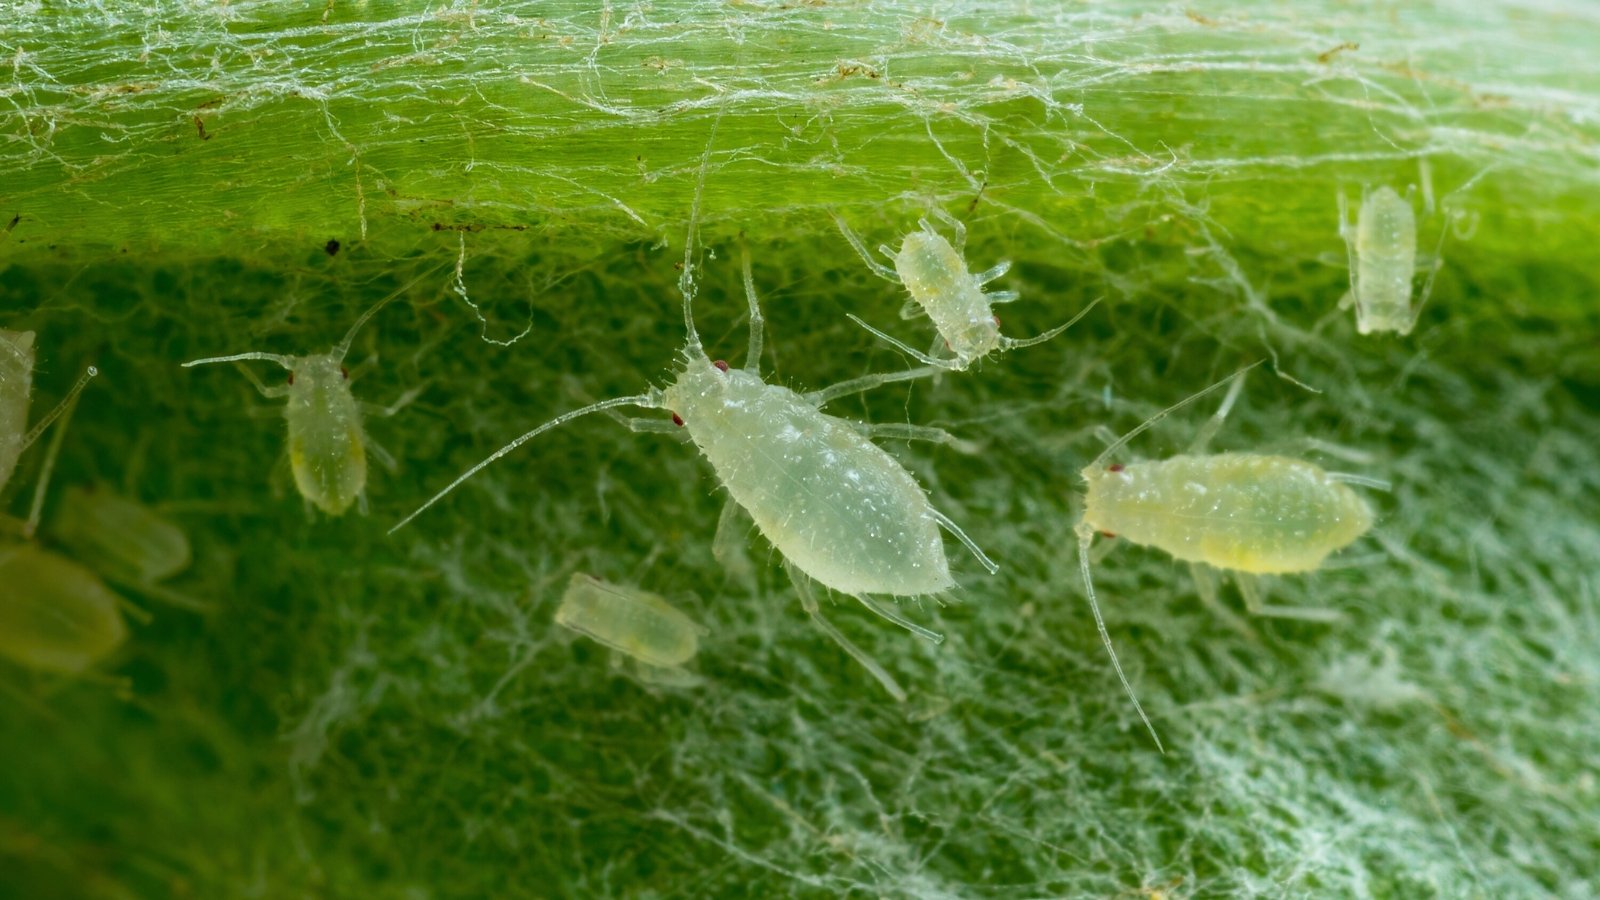 Close-up of aphids on a leaf, which appear as tiny, soft-bodied insects with pear-shaped bodies, pale green in color.